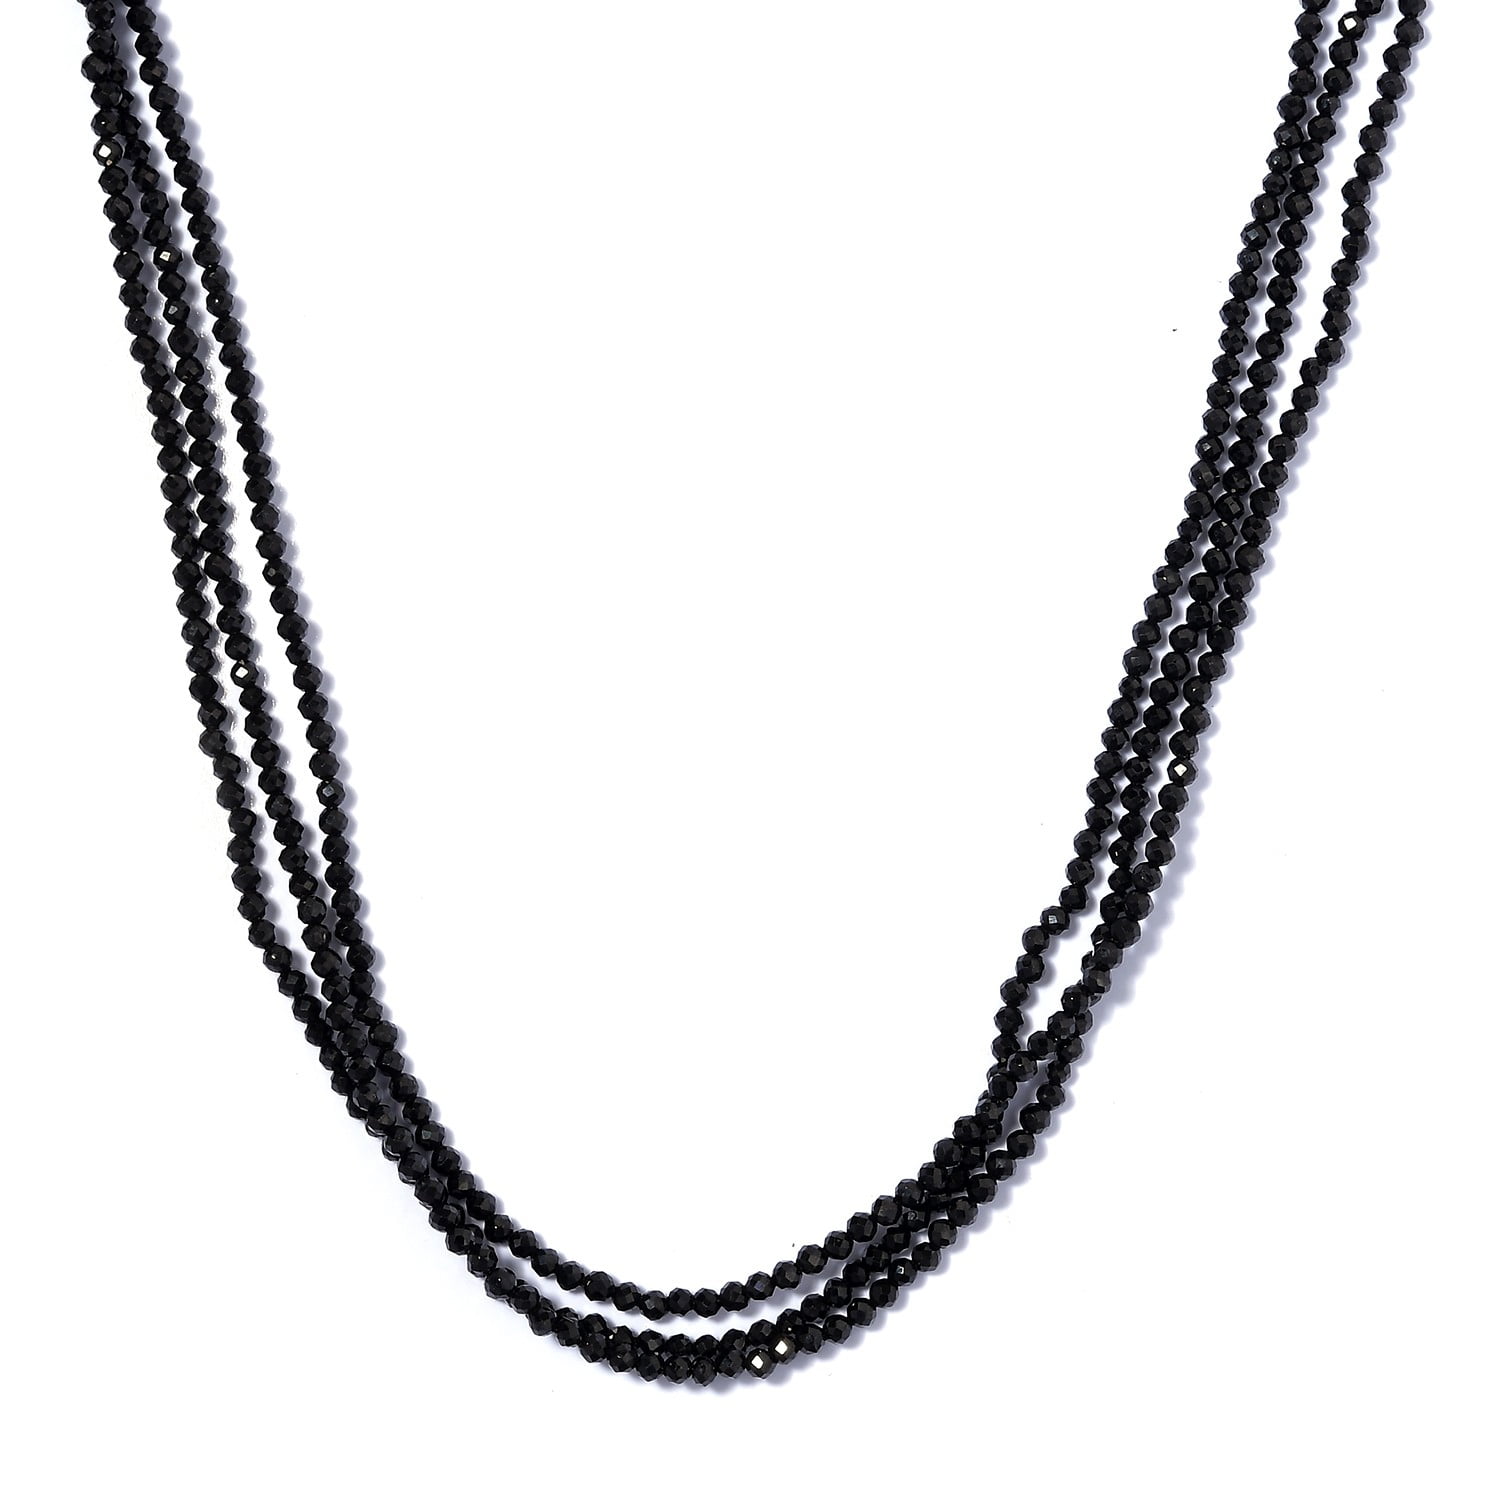 Shop LC Black Spinel Necklace - Black Beaded Layered Necklace for Women ...